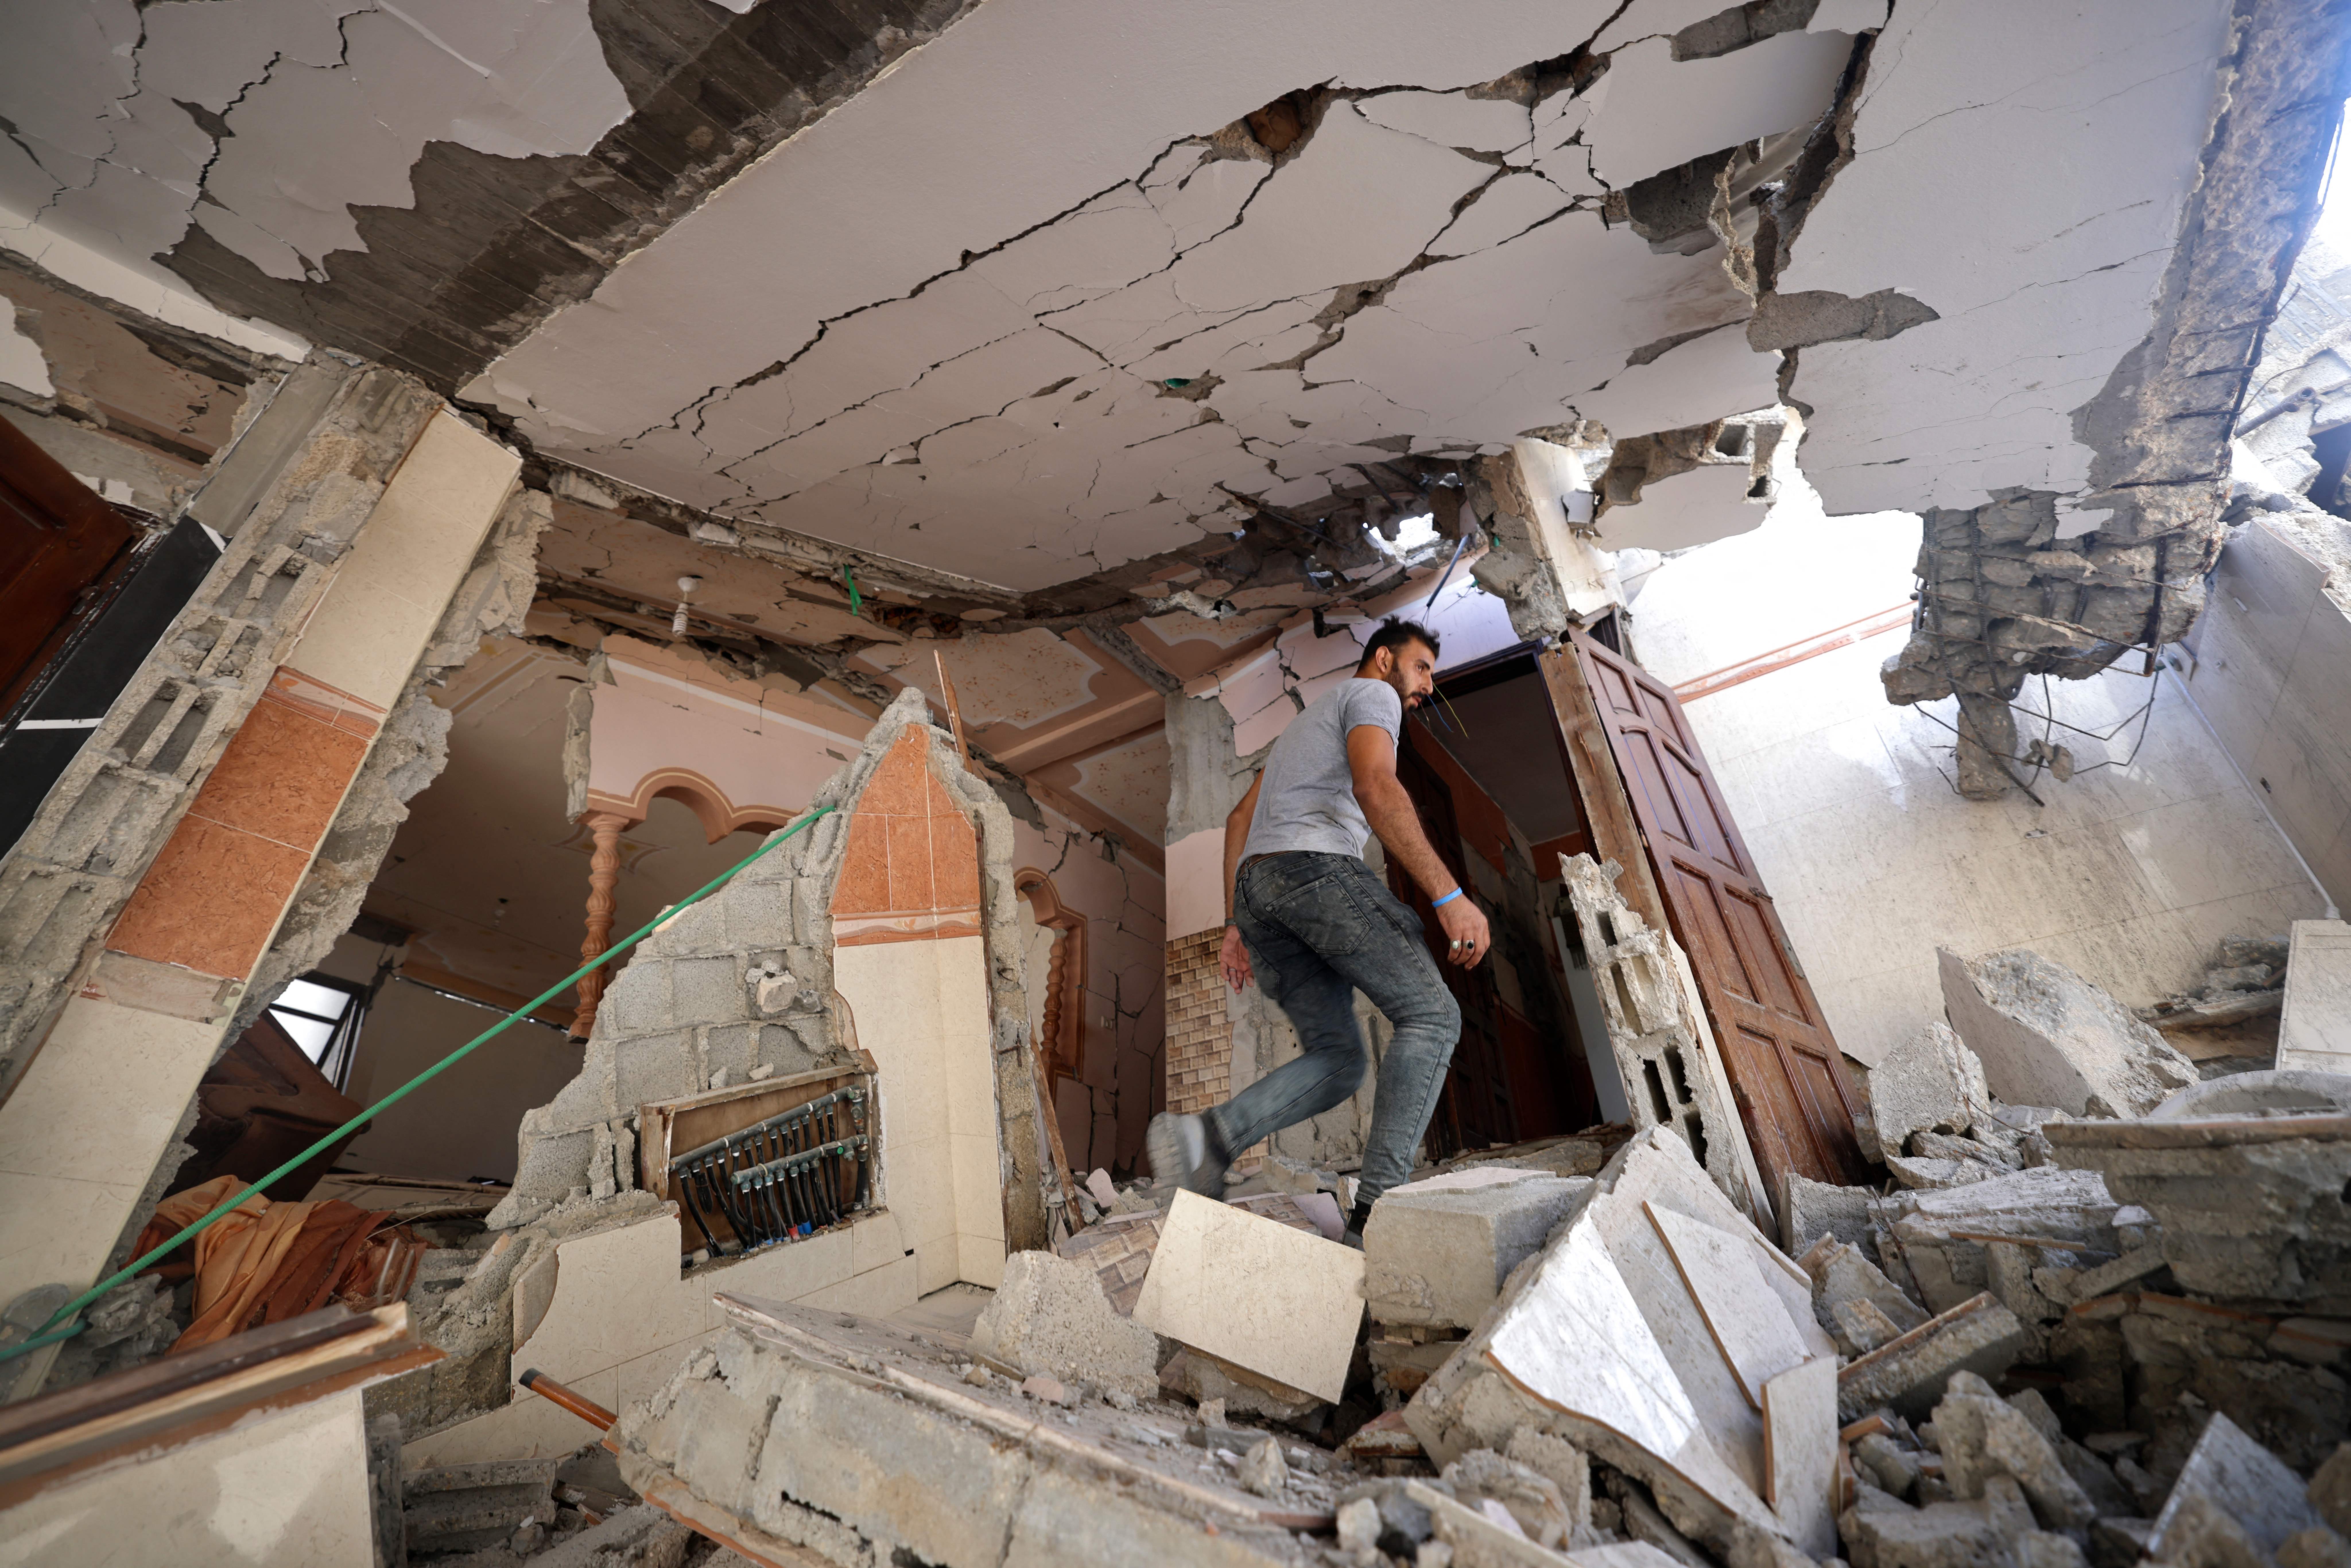 A man walks amidst the rubble of his home.